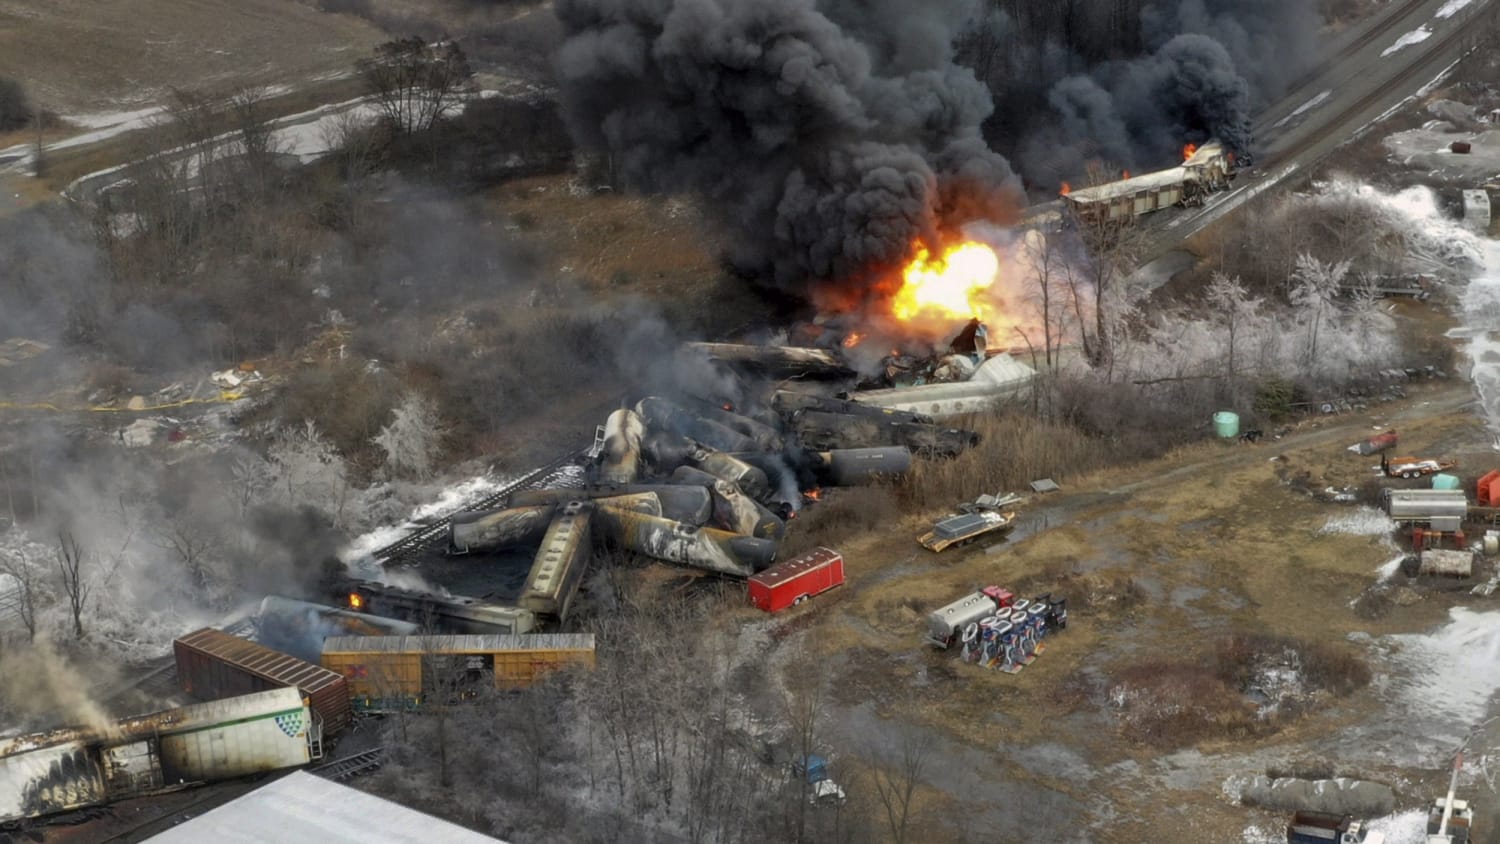 Lawmakers push Norfolk Southern for more recovery help after Ohio train derailment